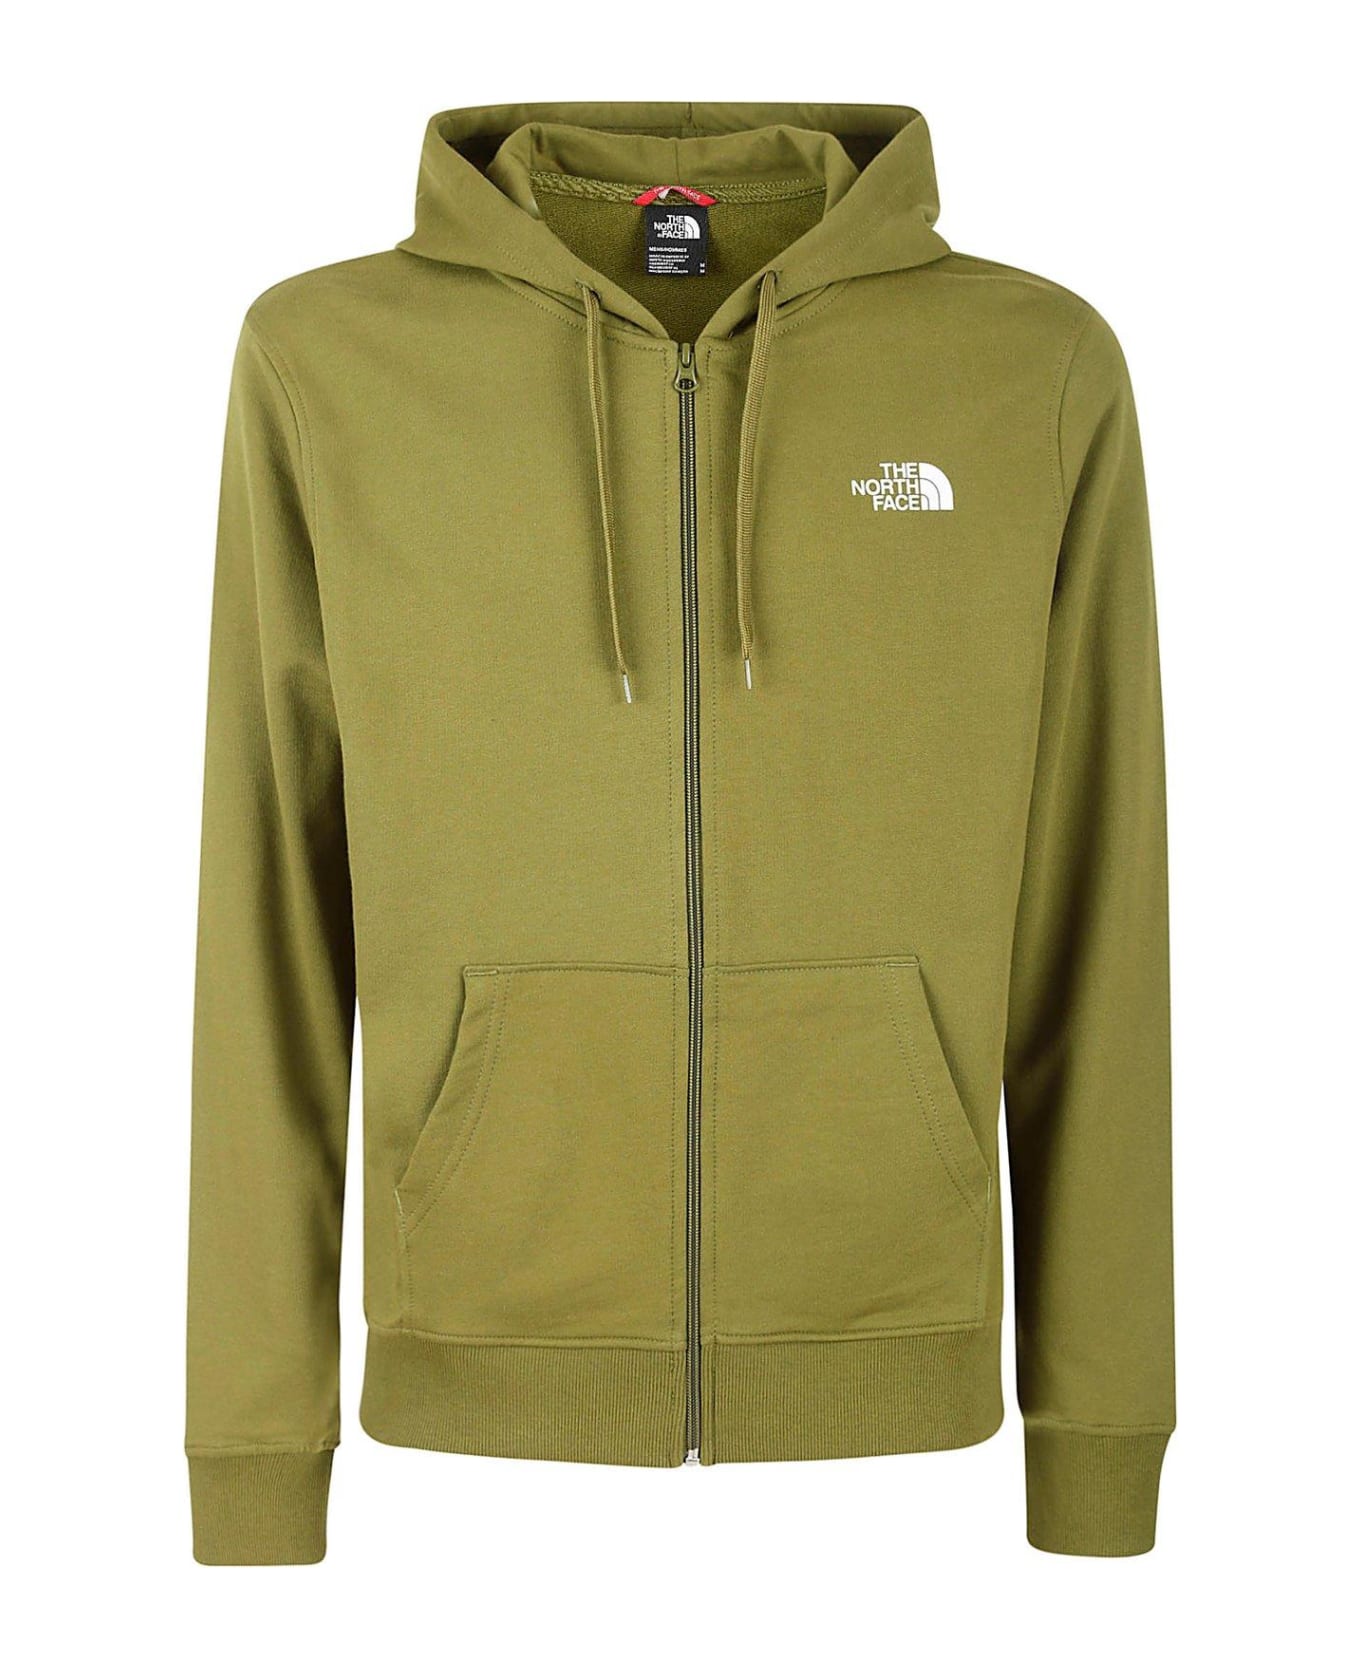 The North Face Logo Printed Zip-up Hoodie - Forest olive